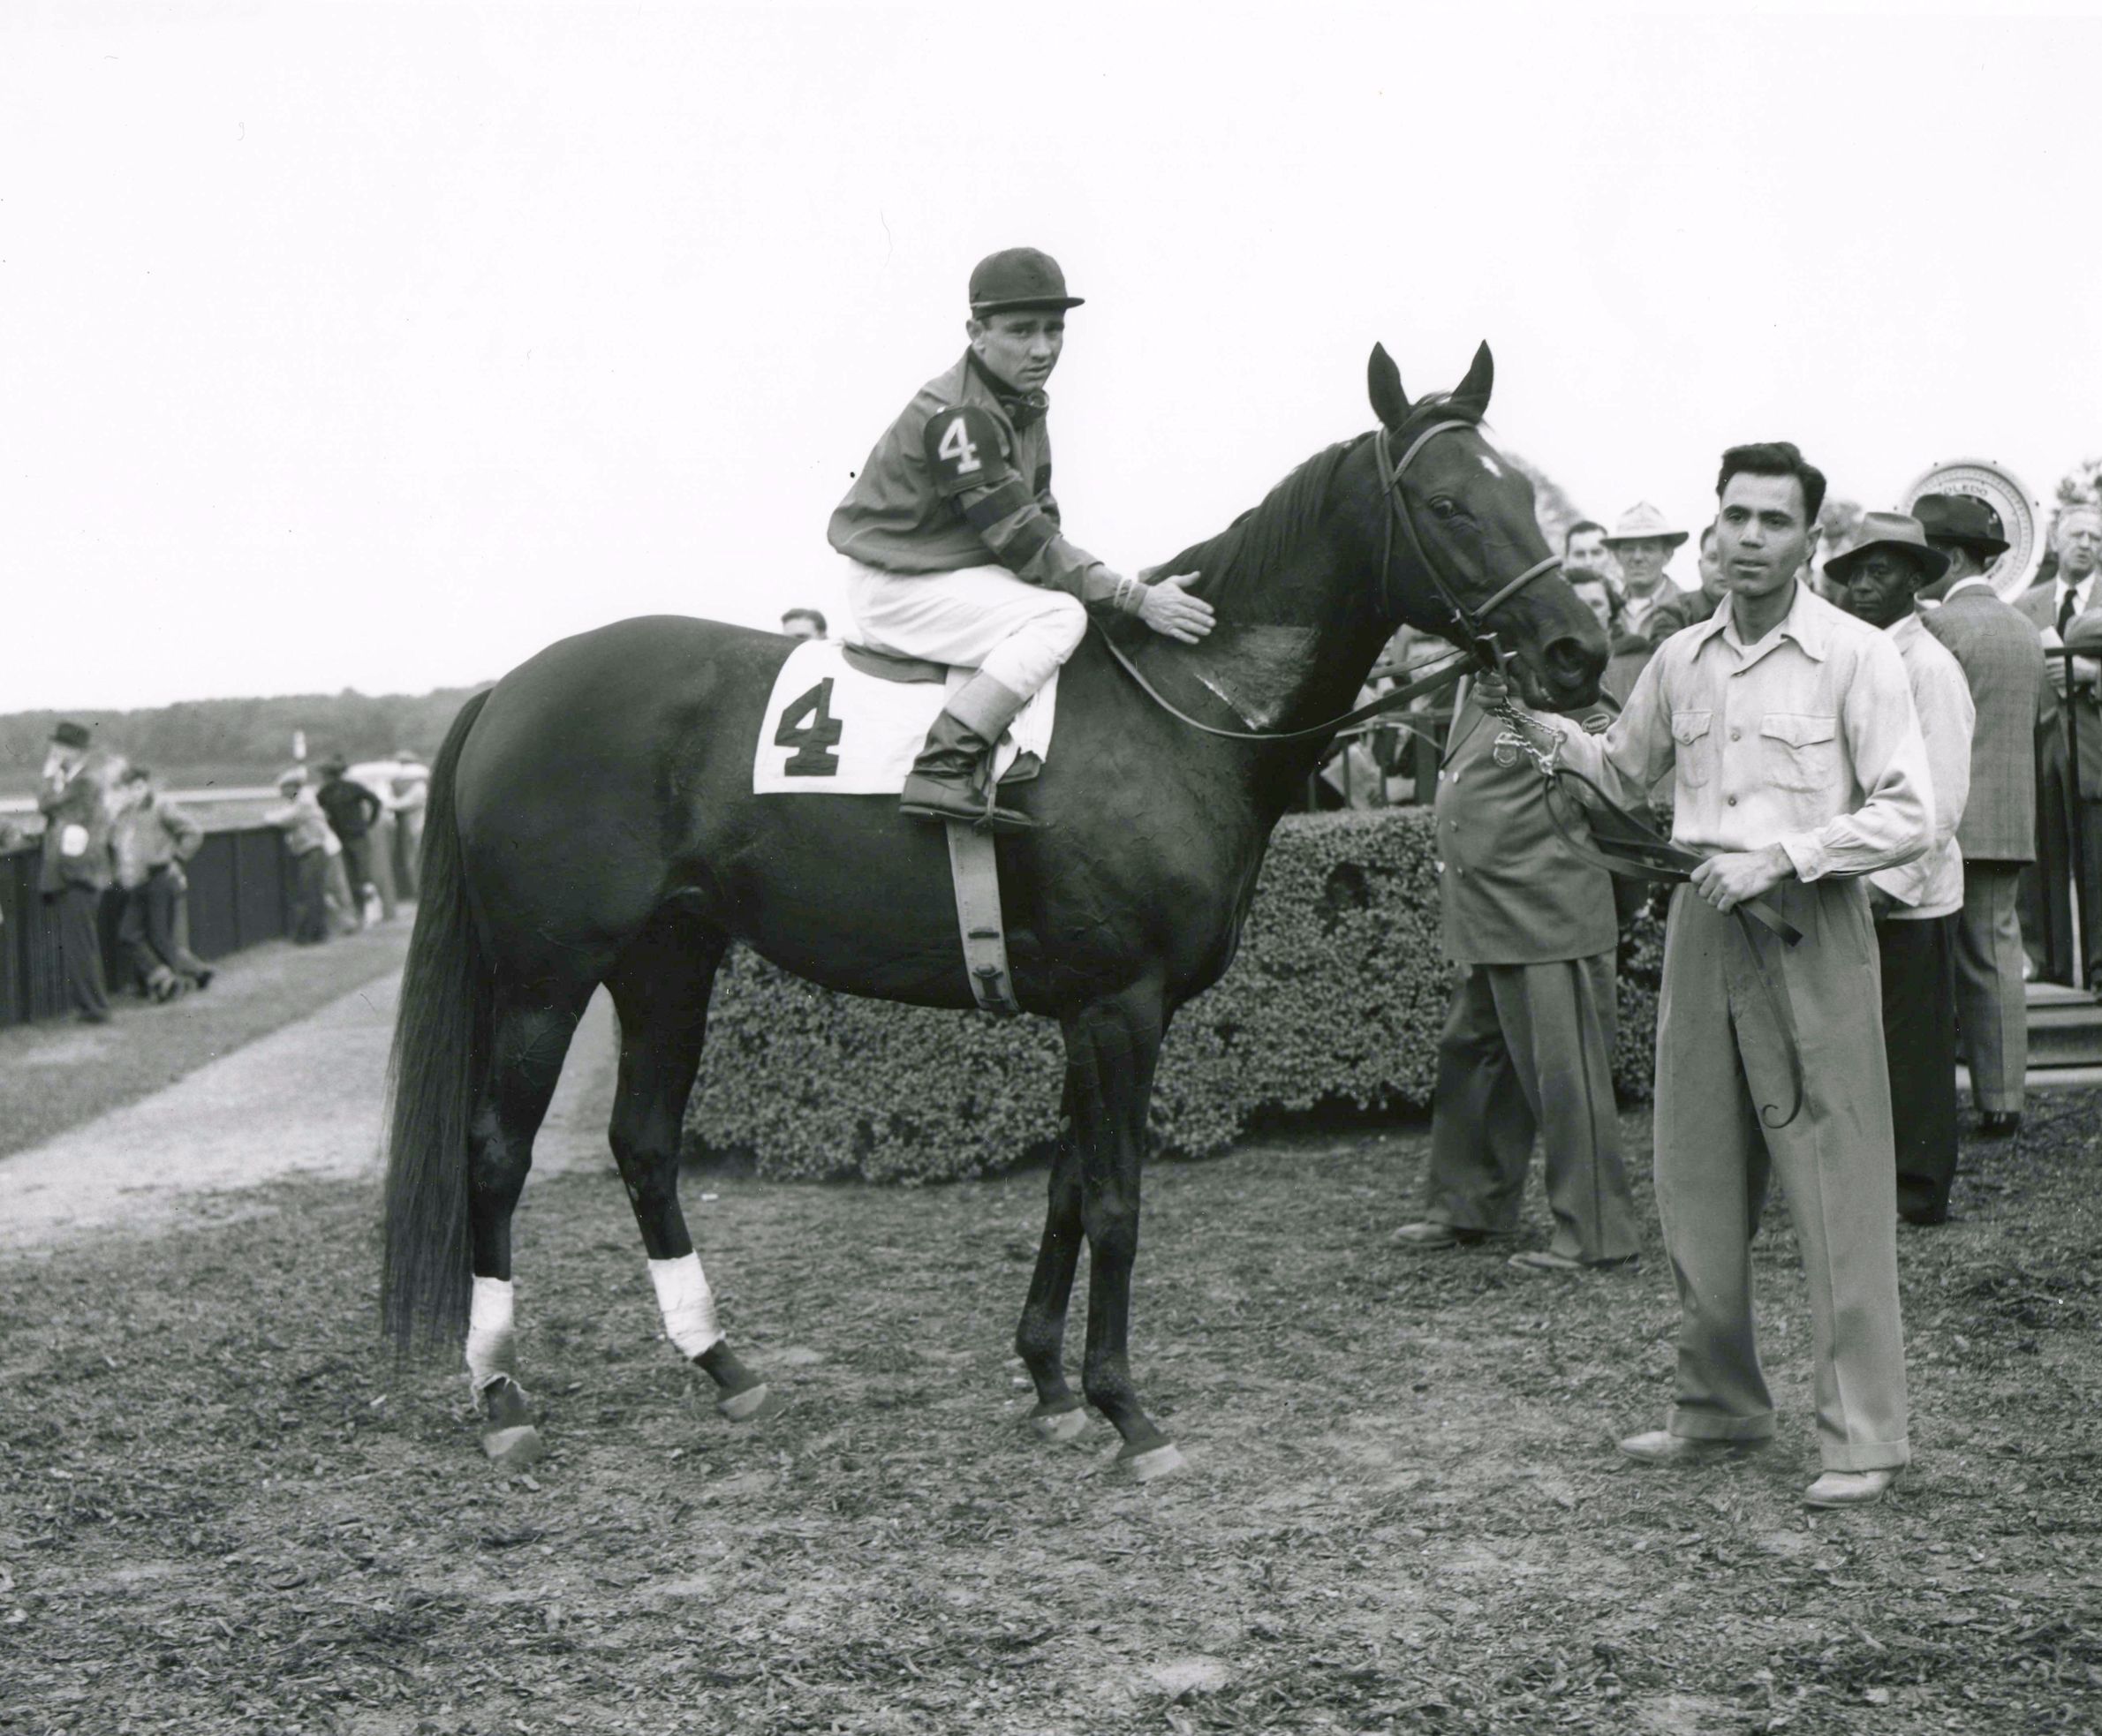 Bewitch (Steve Brooks up) in the winner's circle for the 1950 War Date Handicap at Belmont Park (Keeneland Library Morgan Collection/Museum Collection)